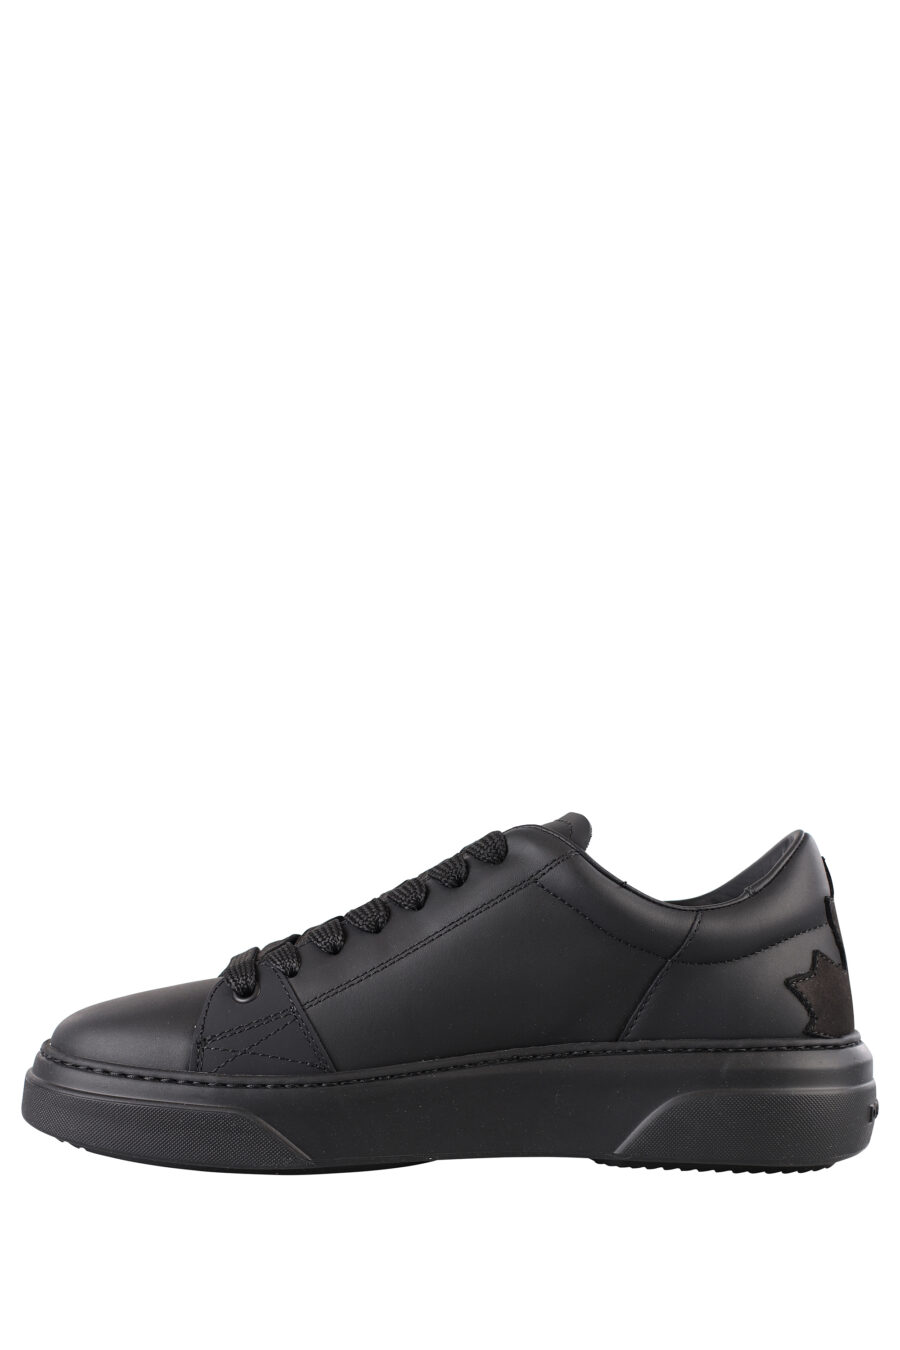 Black trainers with small white logo and black sole - IMG 1151